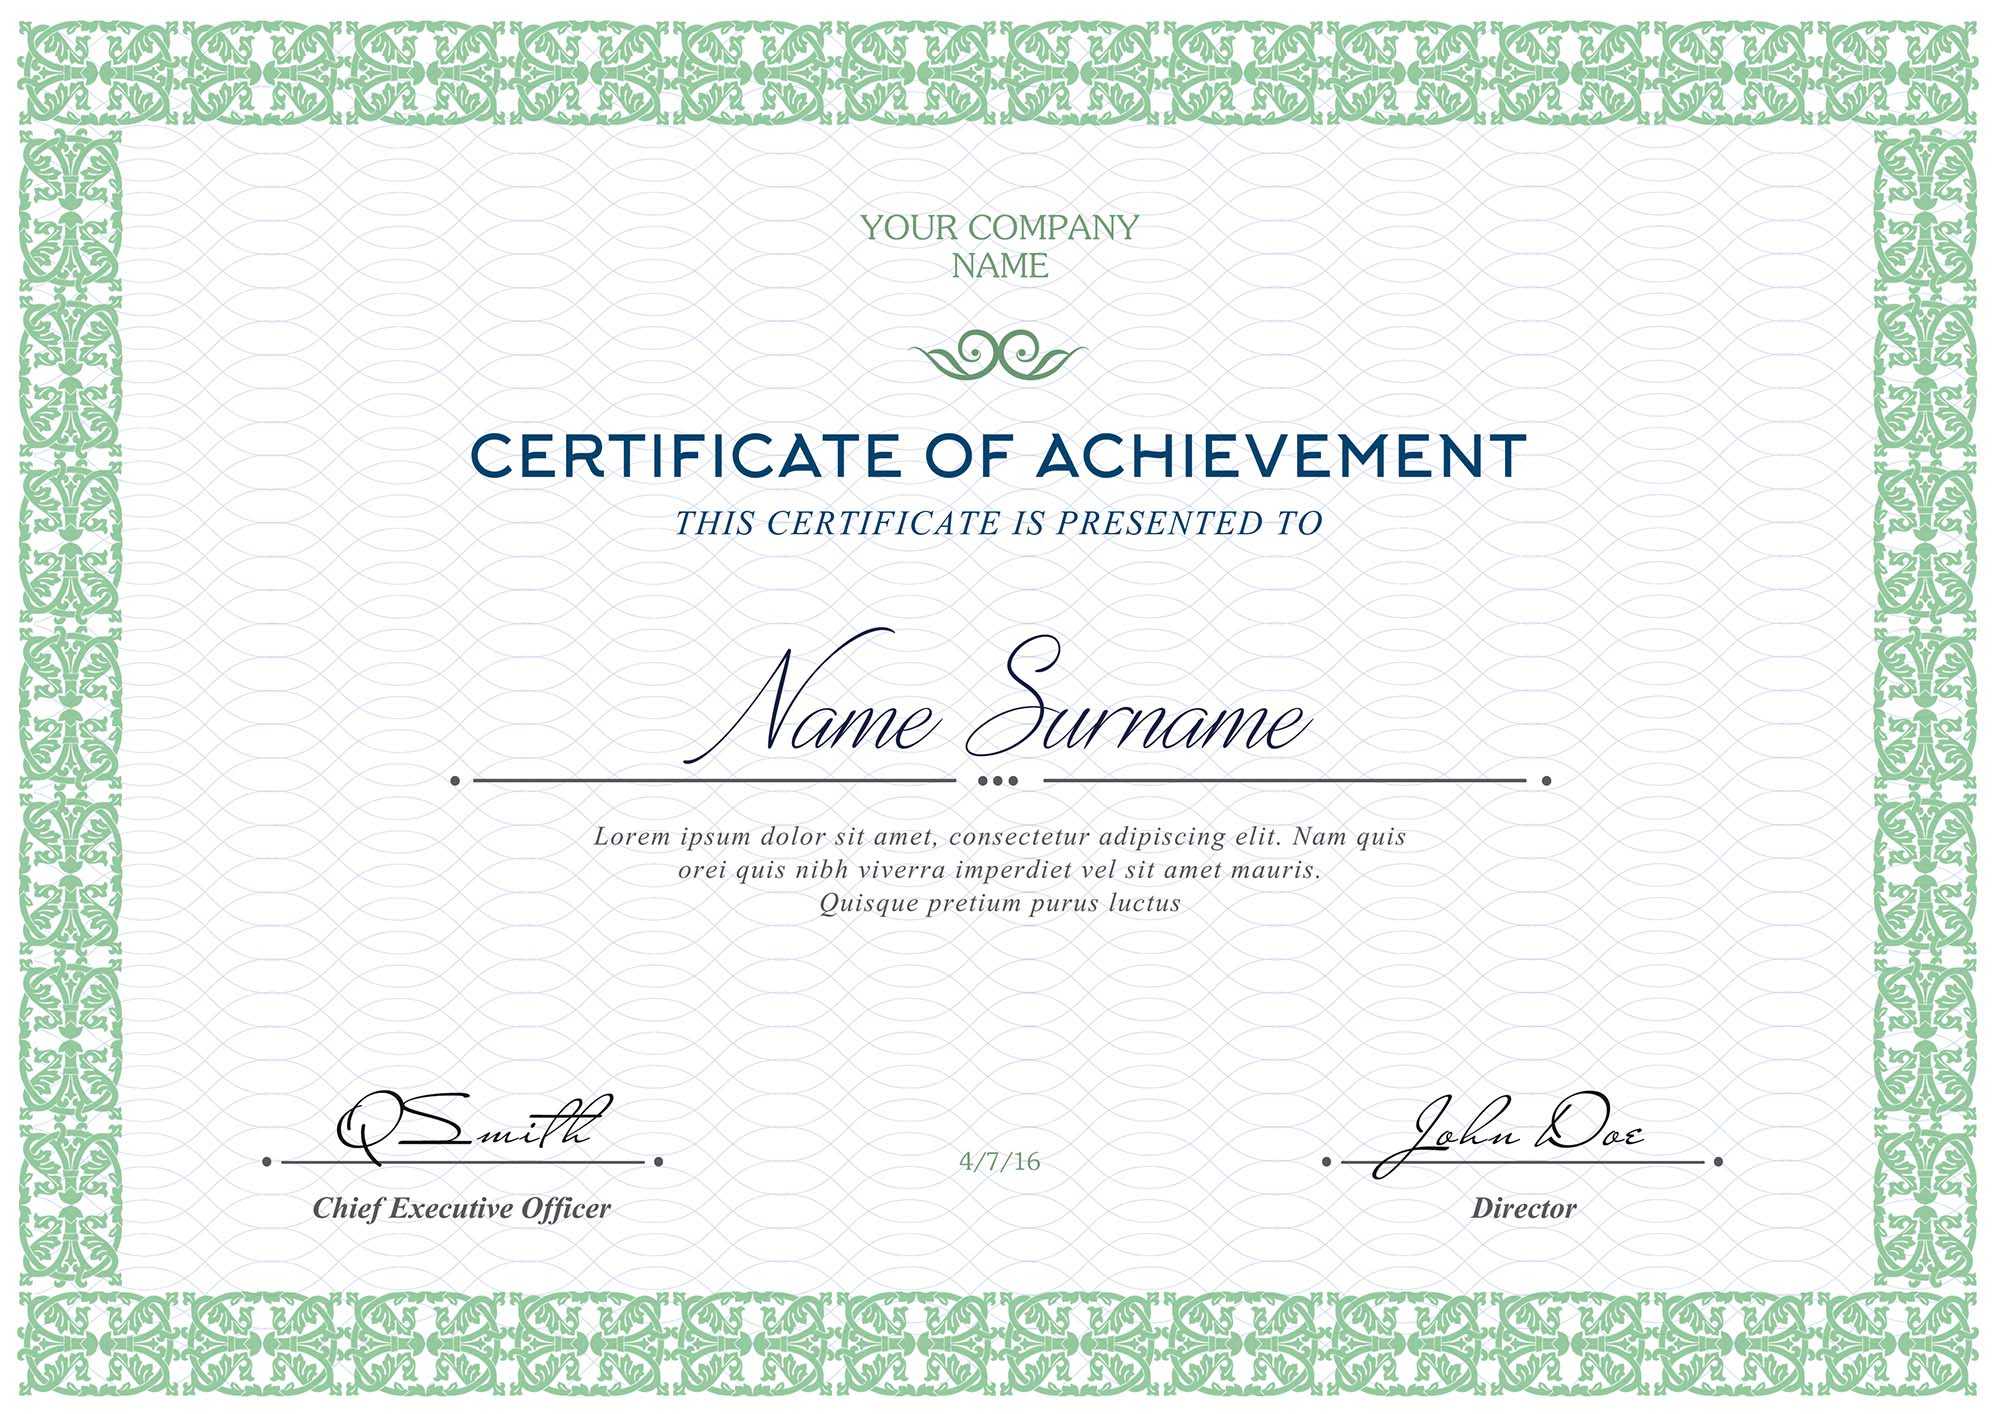 Free Certificates Templates (Psd) Intended For Update Certificates That Use Certificate Templates